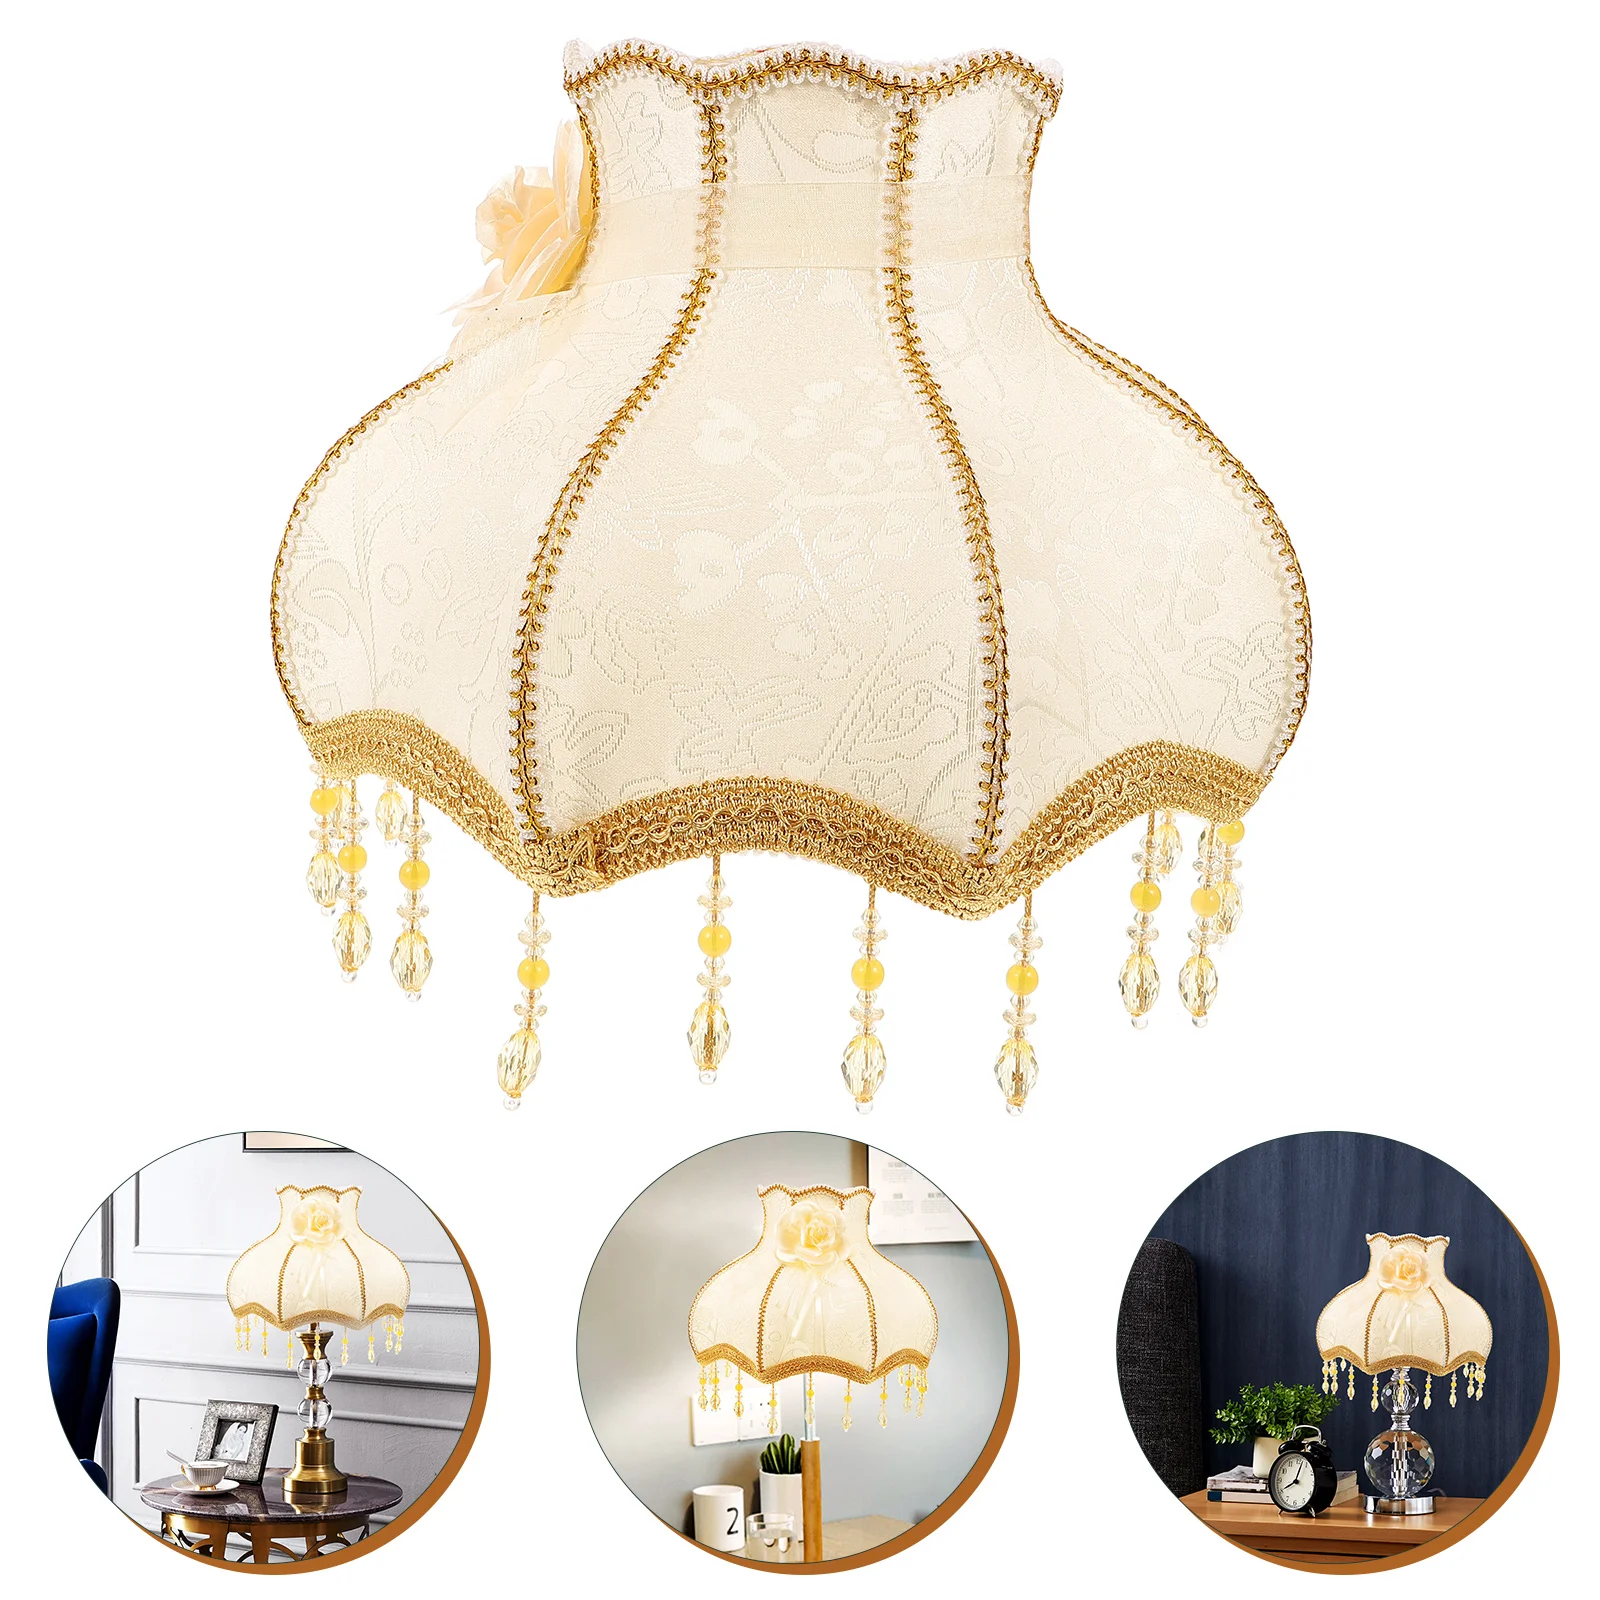 

European Style Lampshade Vintage Barrel Lampshade Retro Art Bead Lace Lampshade Scallop Dome Lamp Shade Living Room Bedroom E27